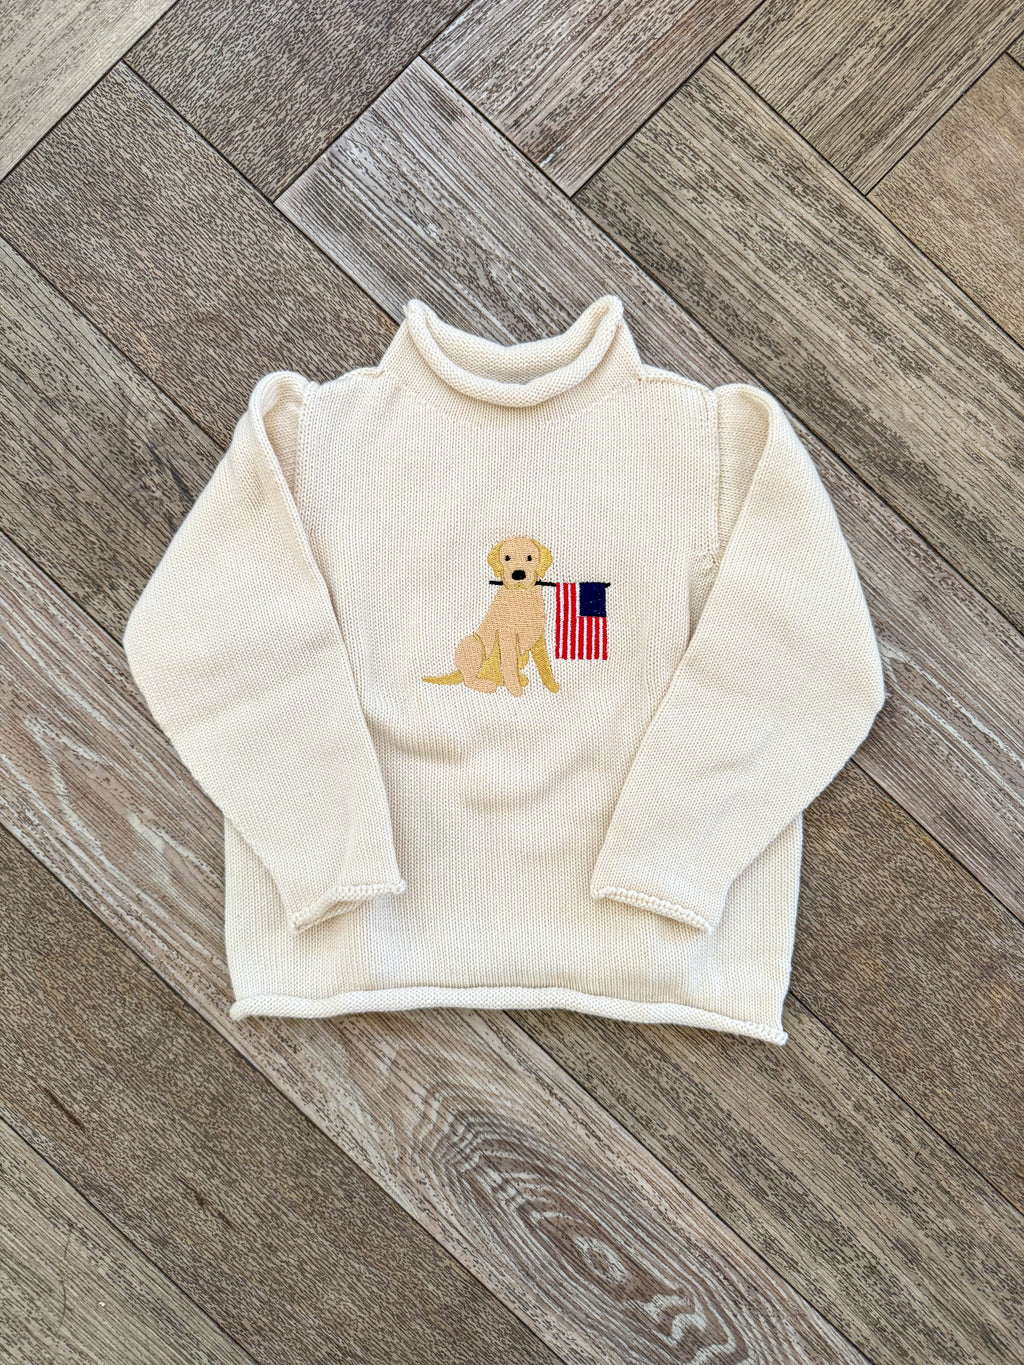 A Soft Idea Roll Neck Sweater in Cream with Patriot Pup